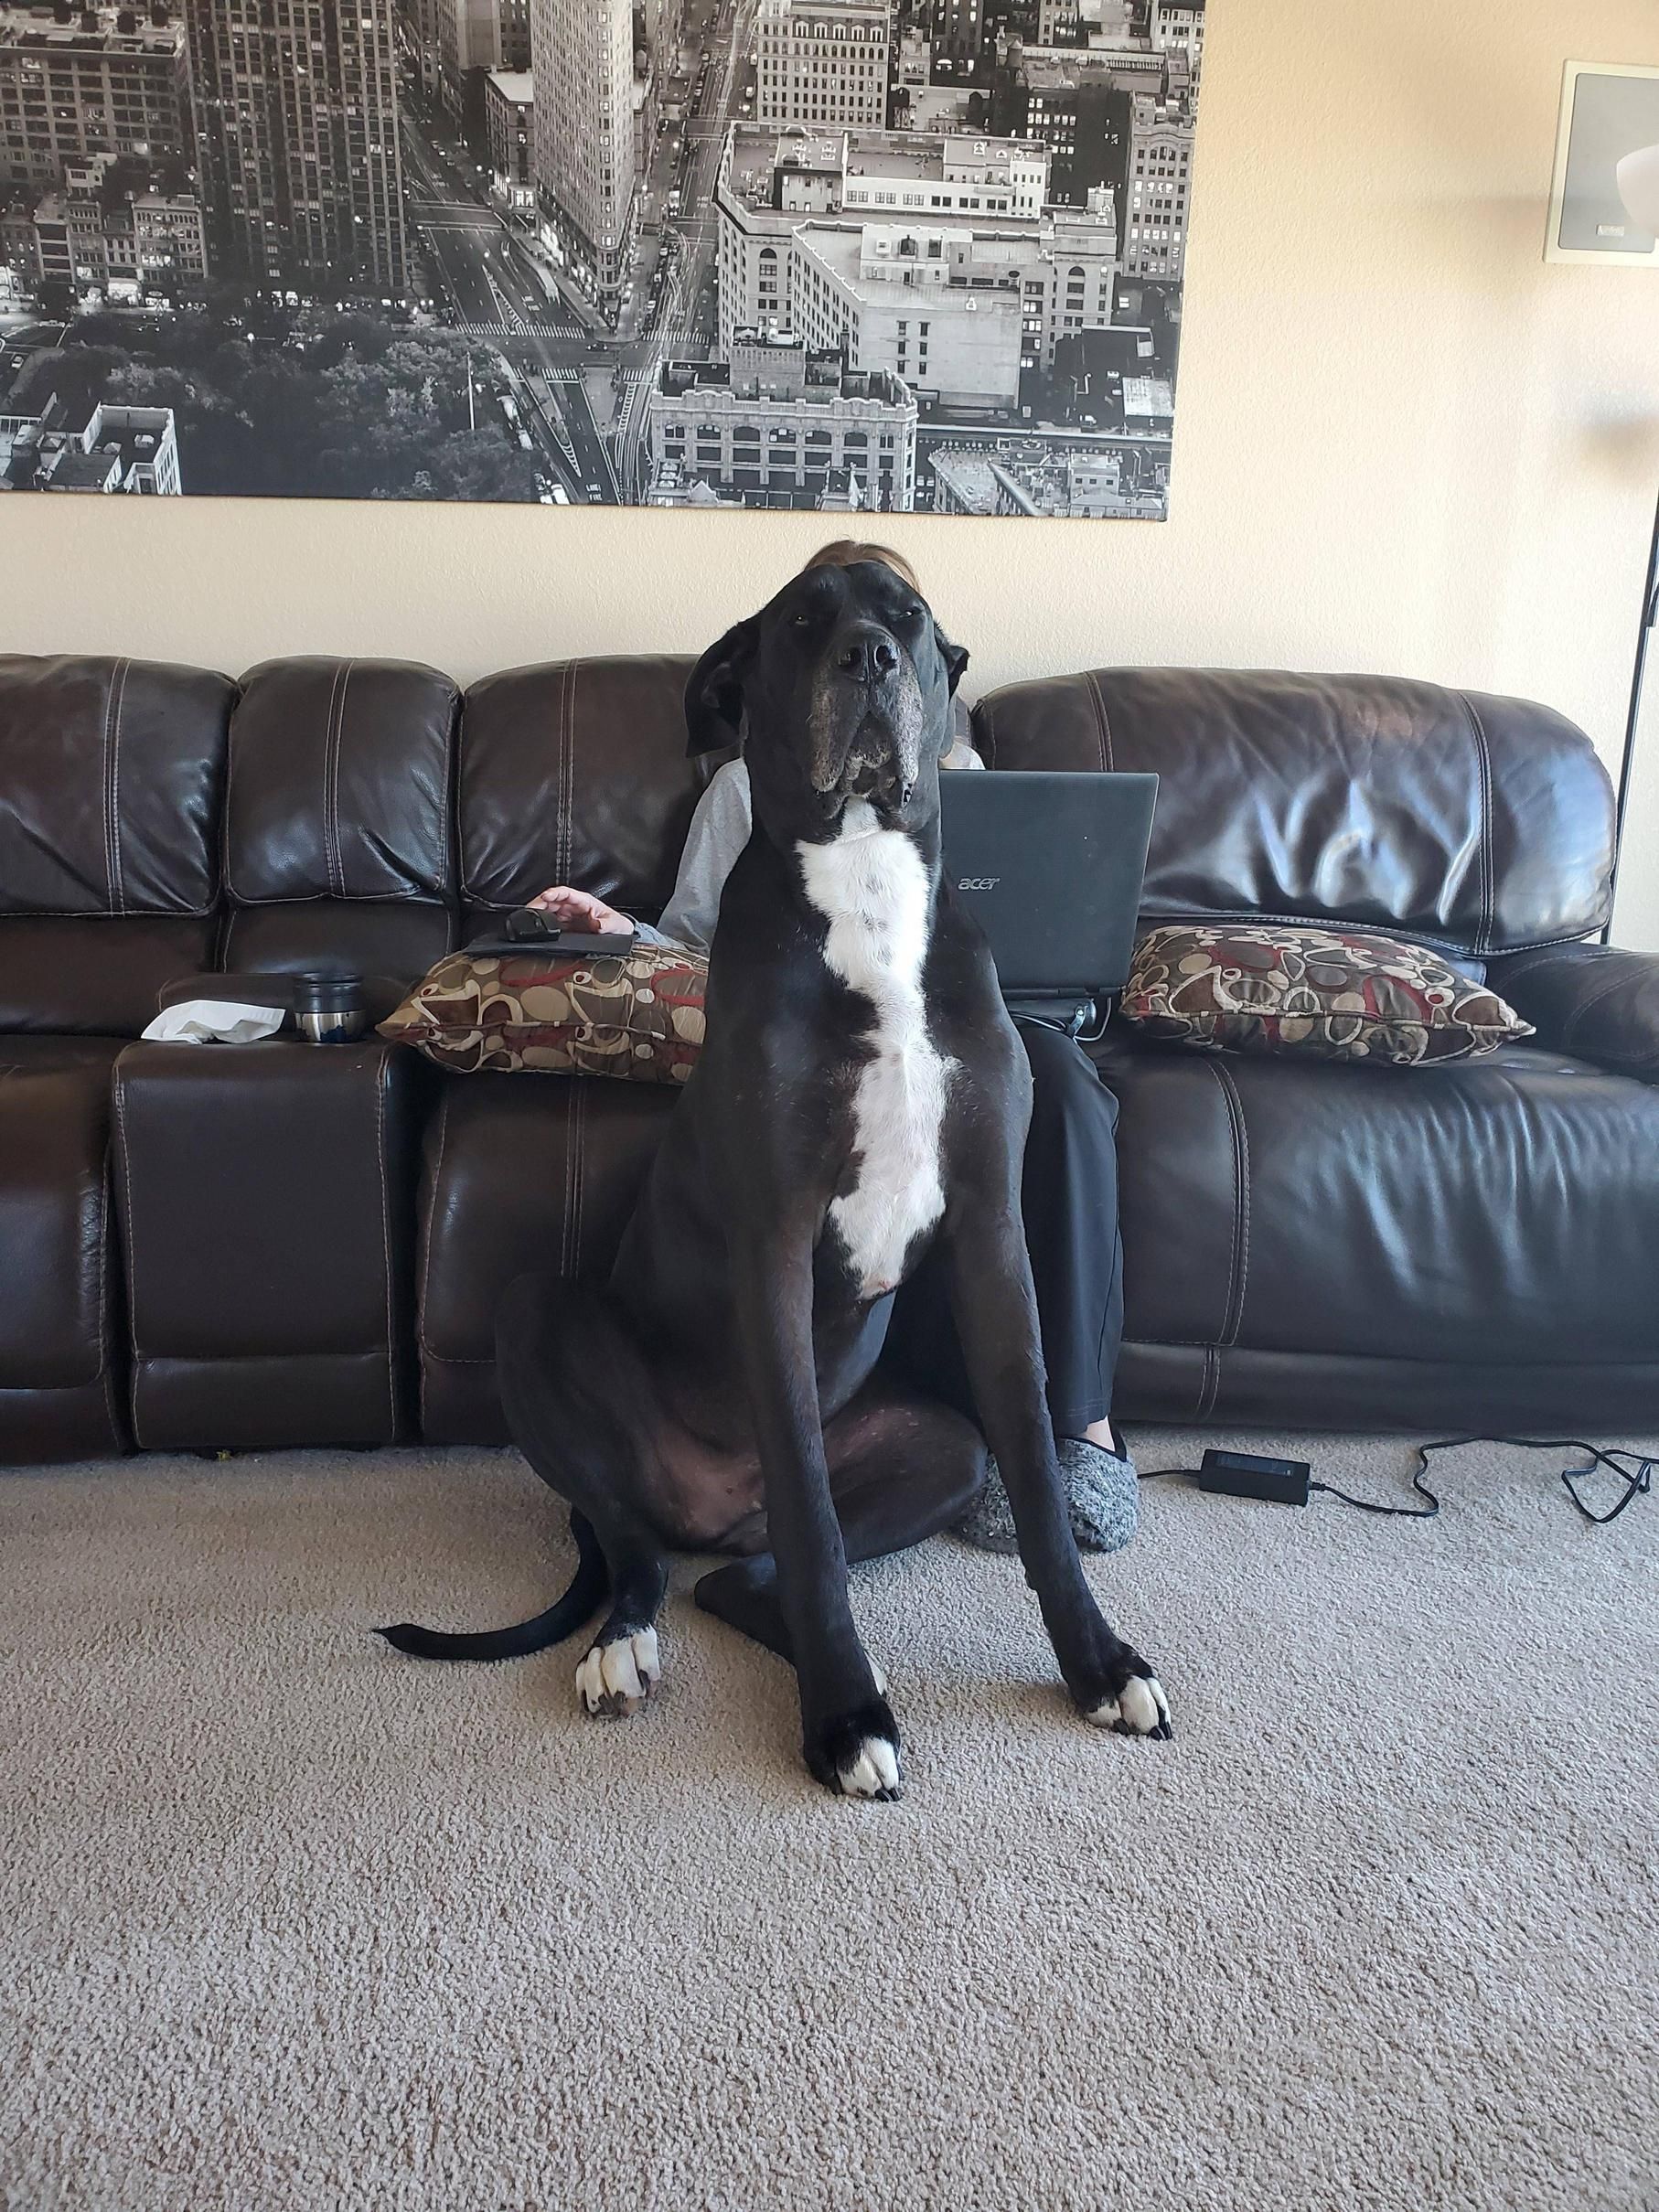 Taking a picture of my wife..then... Great Dane problems...